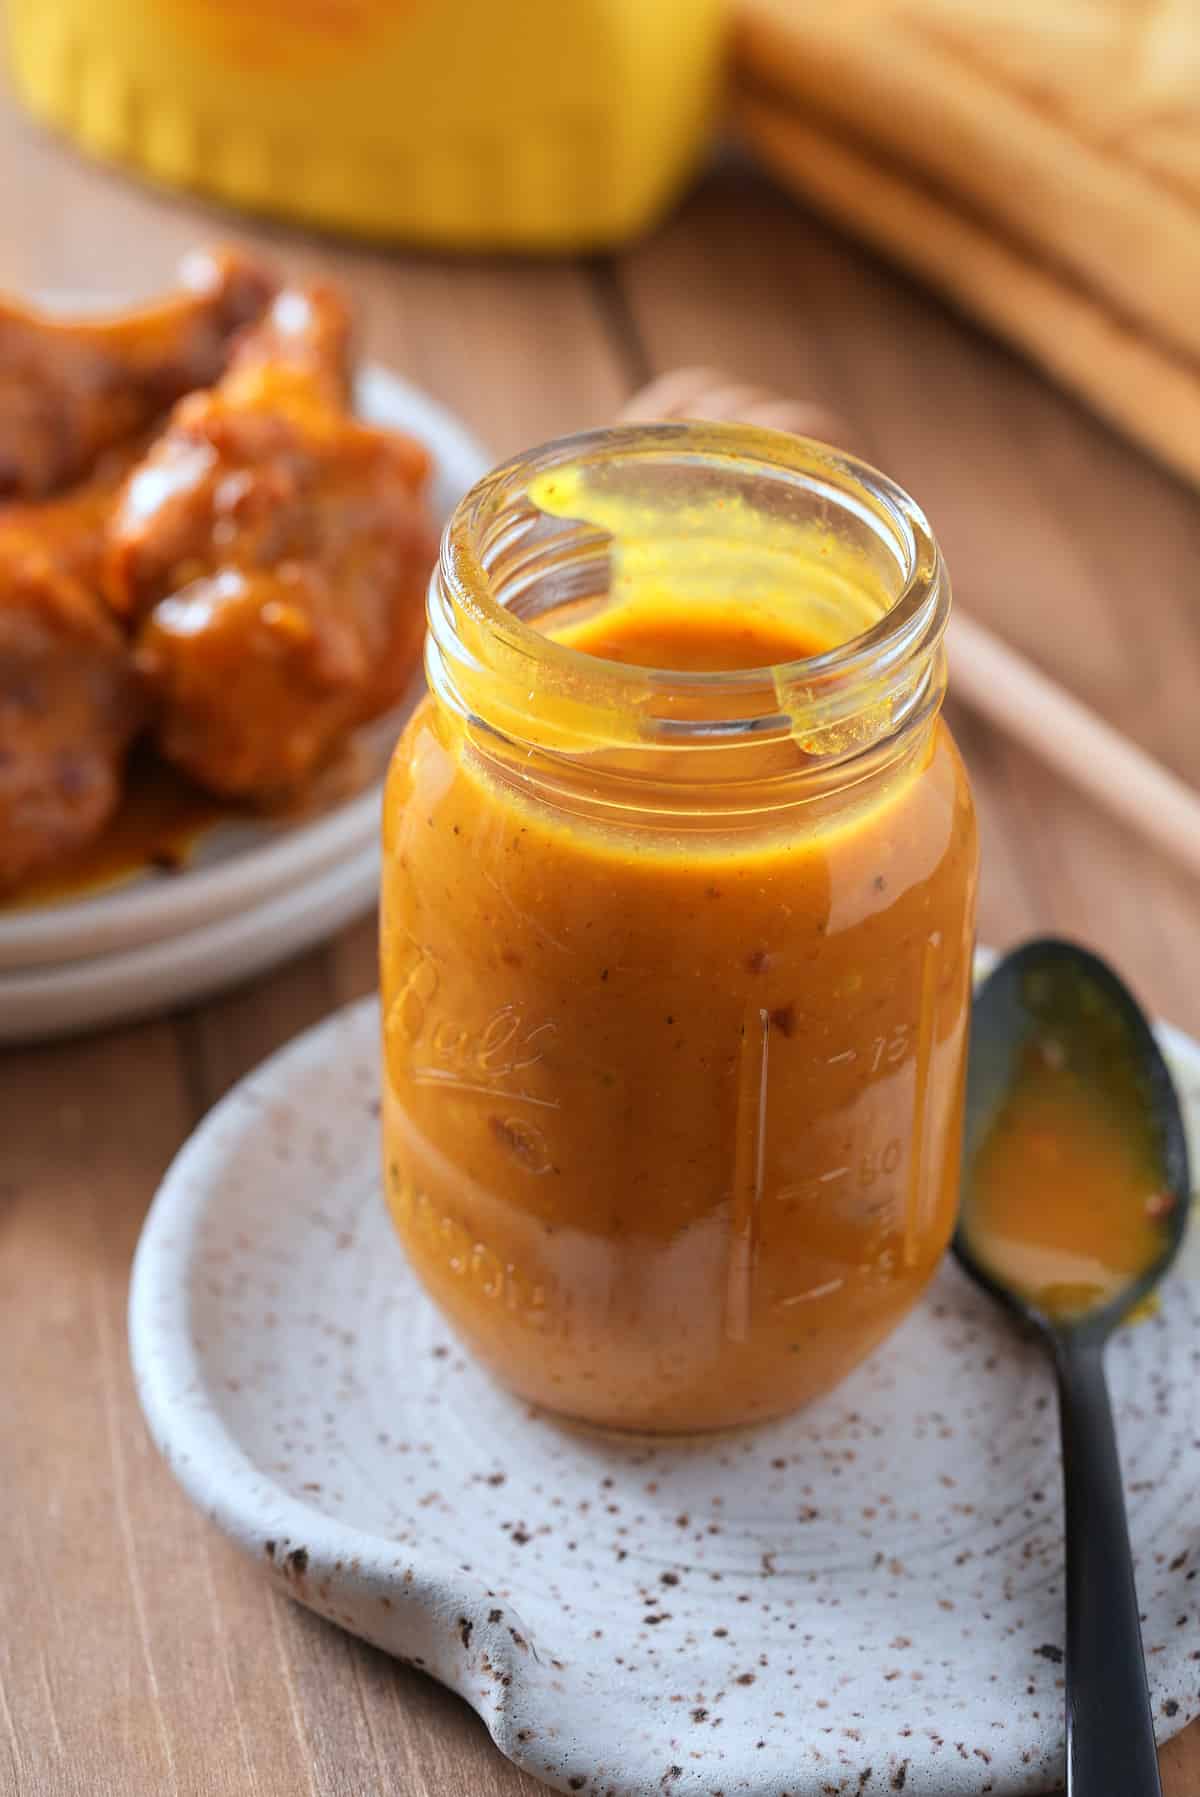 A glass jar filled with Carolina Gold BBQ sauce, with a dish of grilled chicken set alongside.